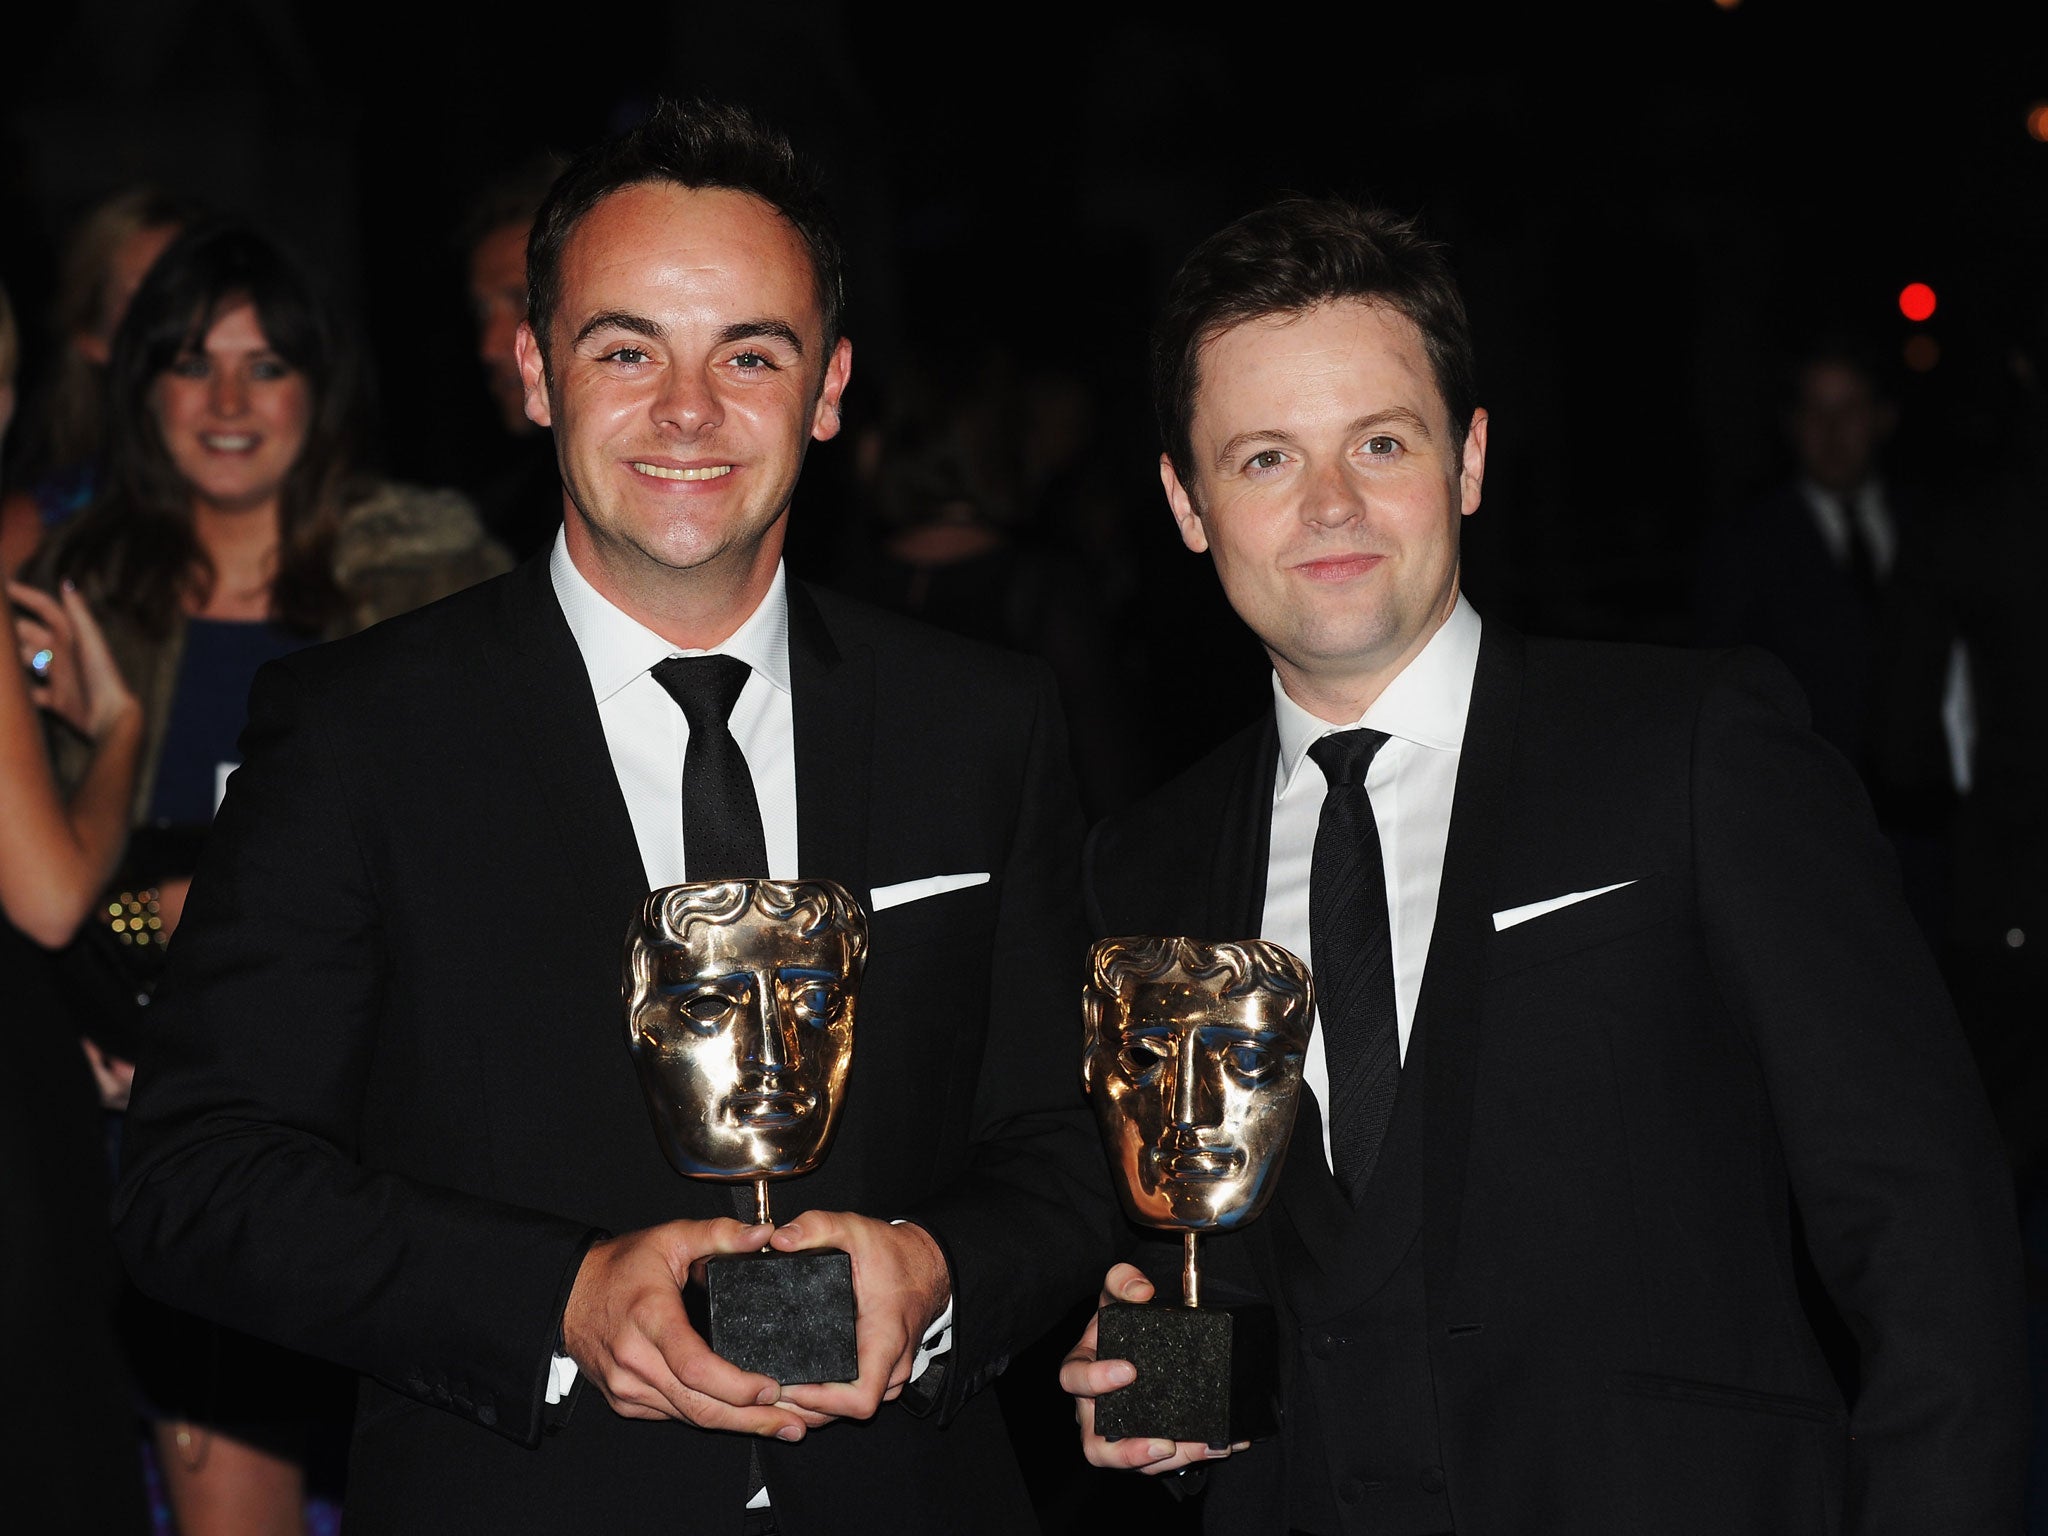 Bafta-winning TV Presenters Anthony McPartlin and Declan Donnelly